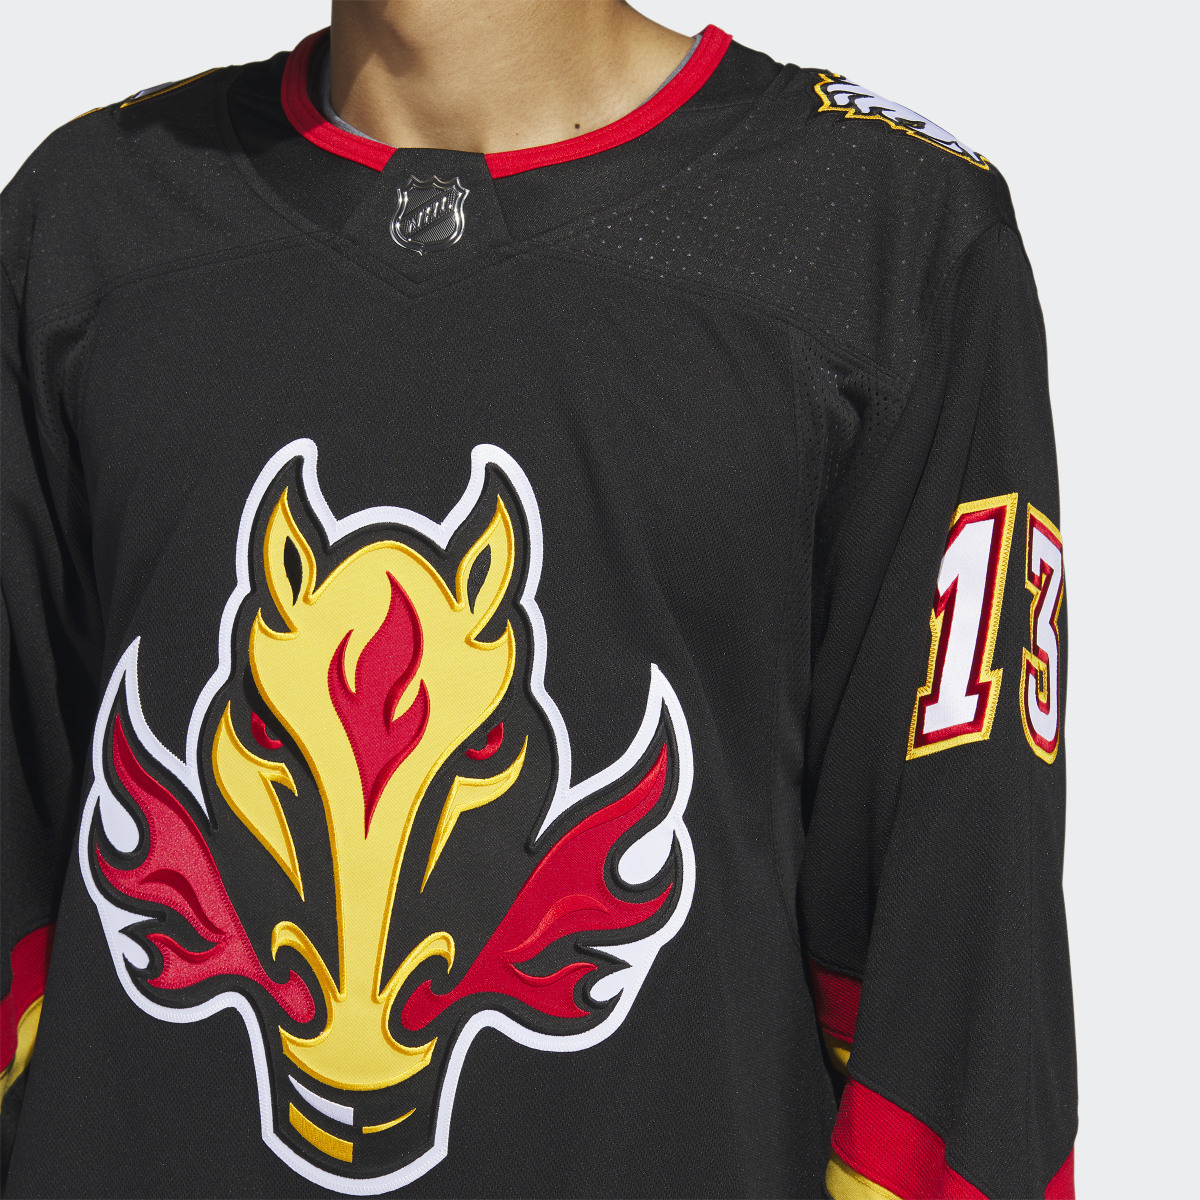 Adidas Flames Gaudreau Third Authentic Jersey. 7